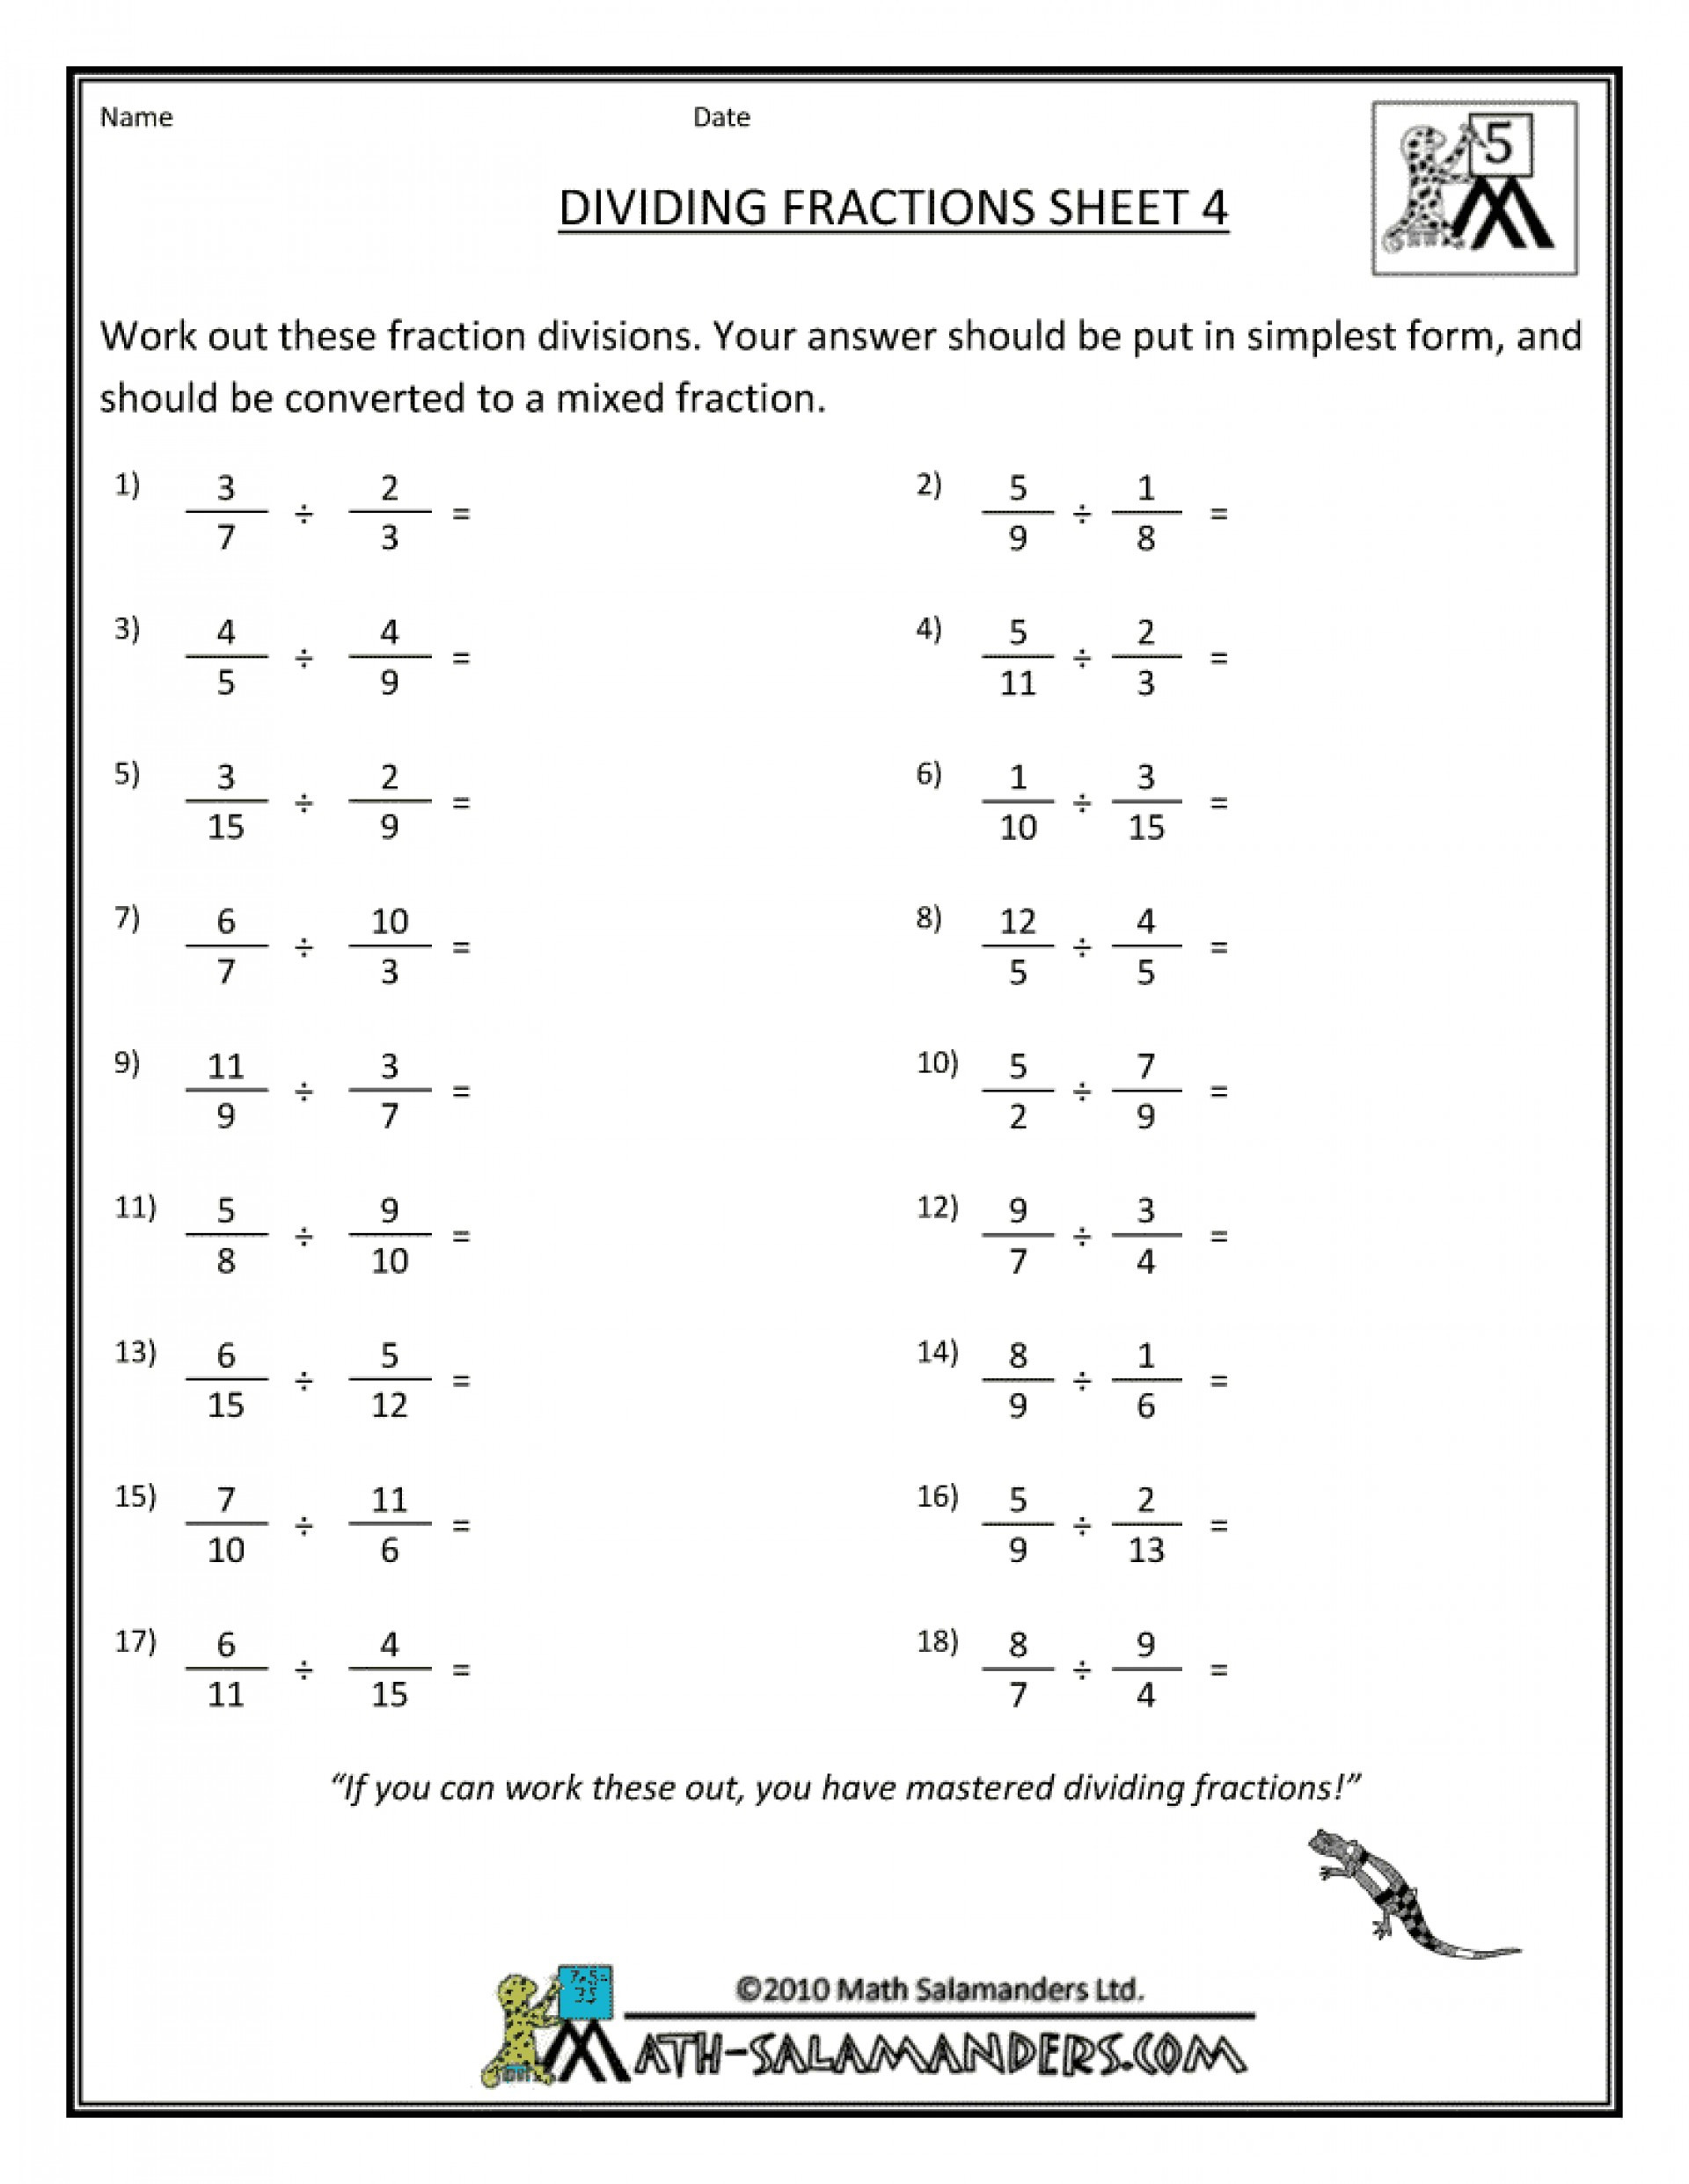 dividing fractions word problems 6th grade worksheets db excelcom